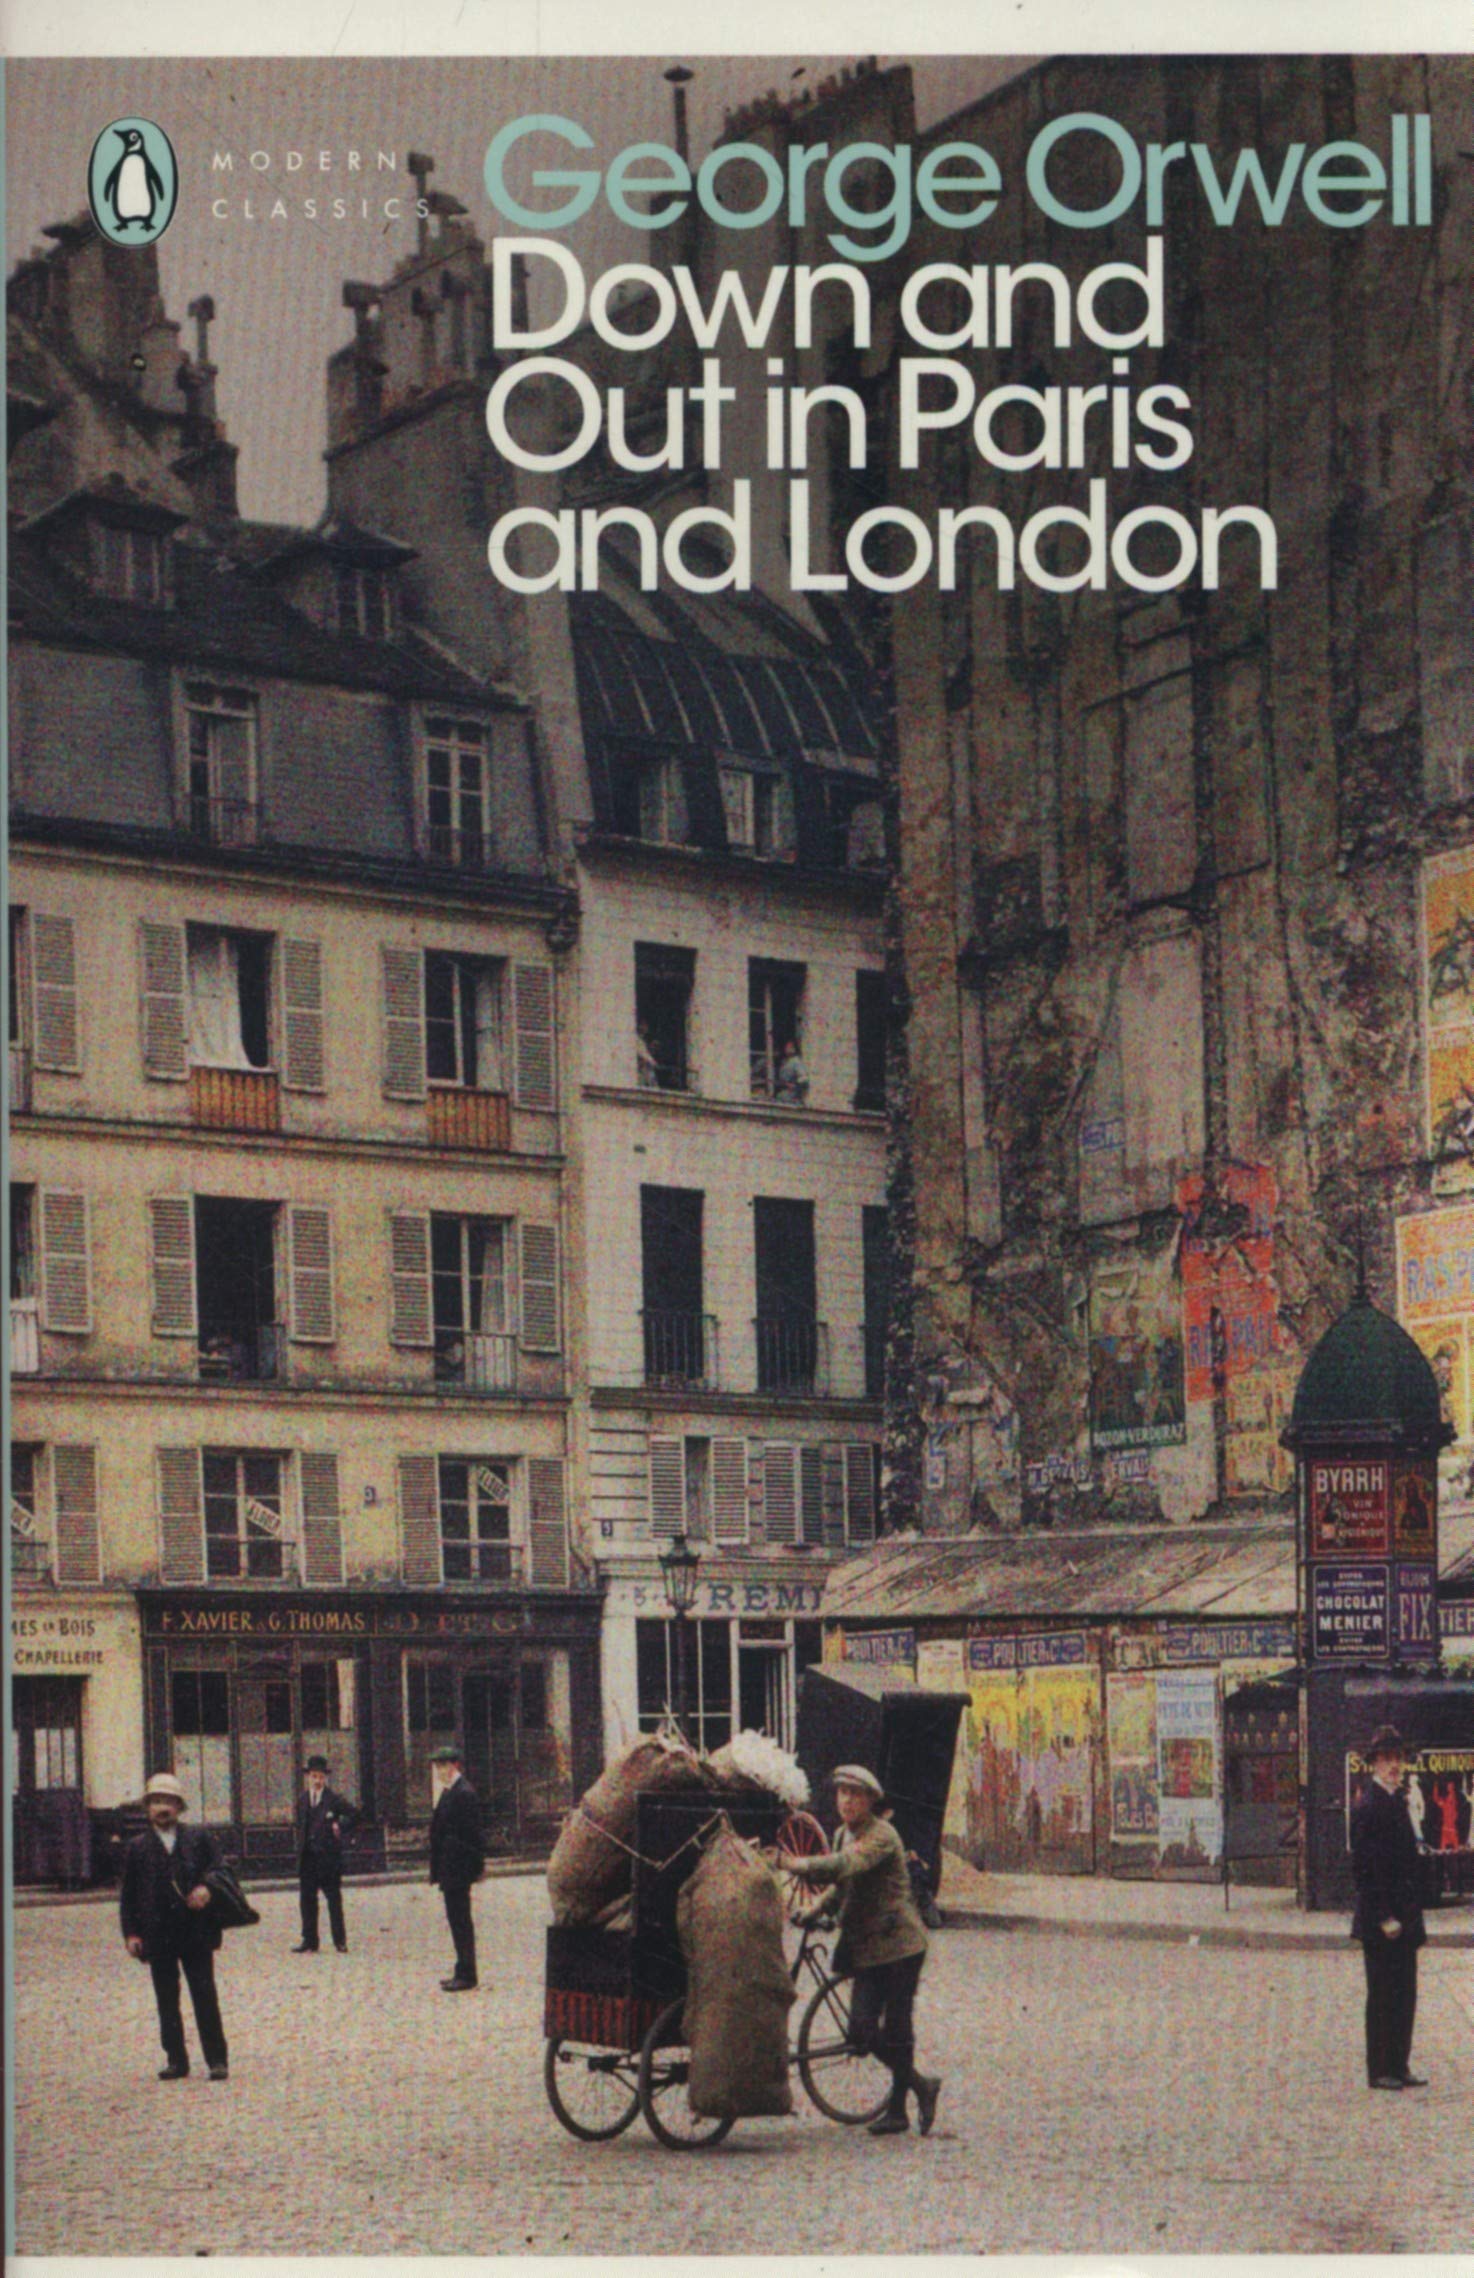 Down and Out in Paris and London book cover